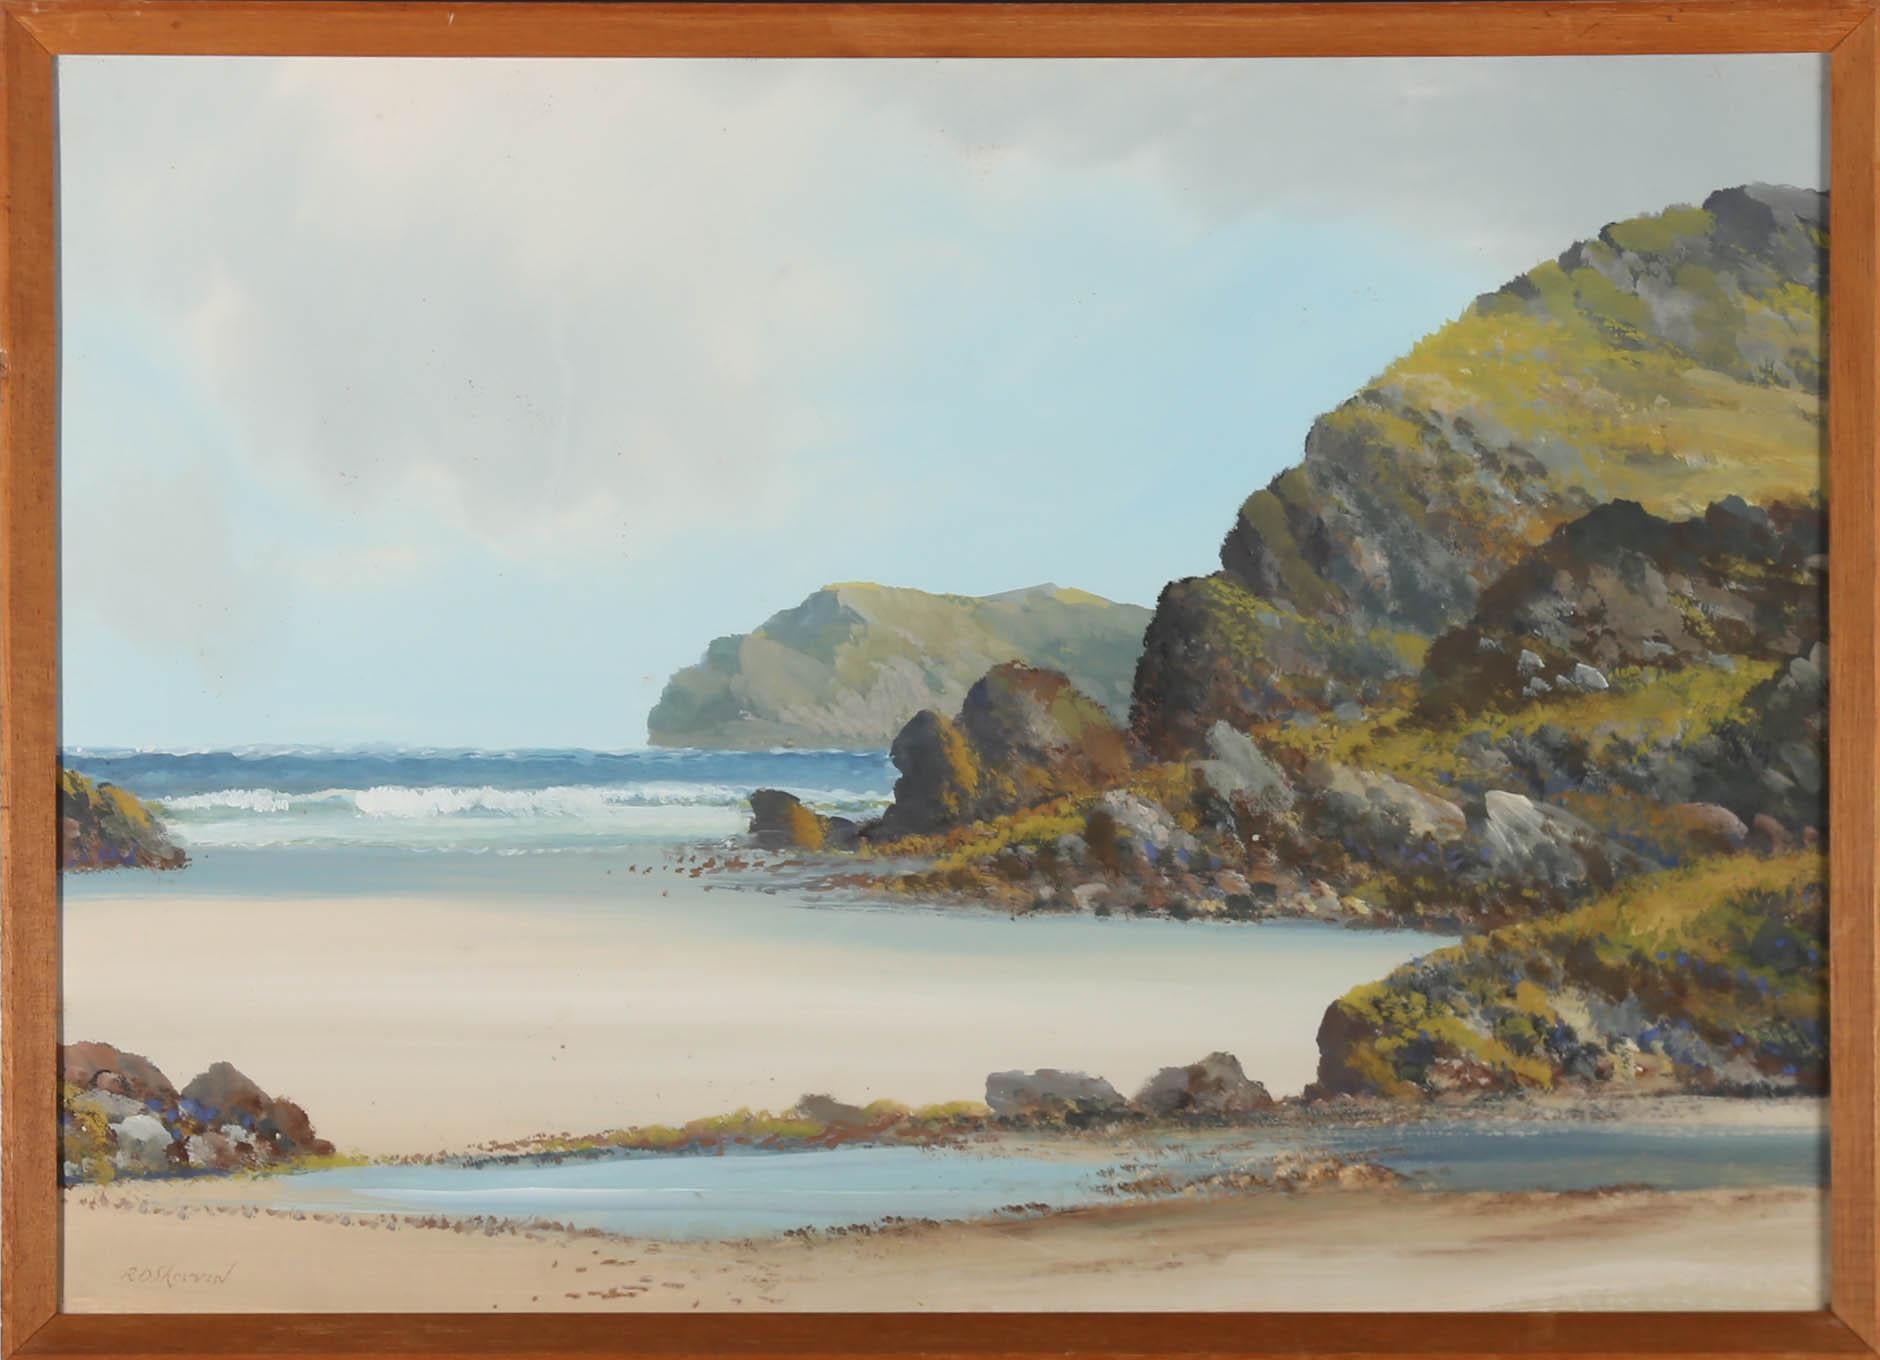 A relaxing coastal scene in gouache by British landscape artist Reginald Daniel Sherrin (1981-1971). Well-present in a charming box style frame. Signed. On board.